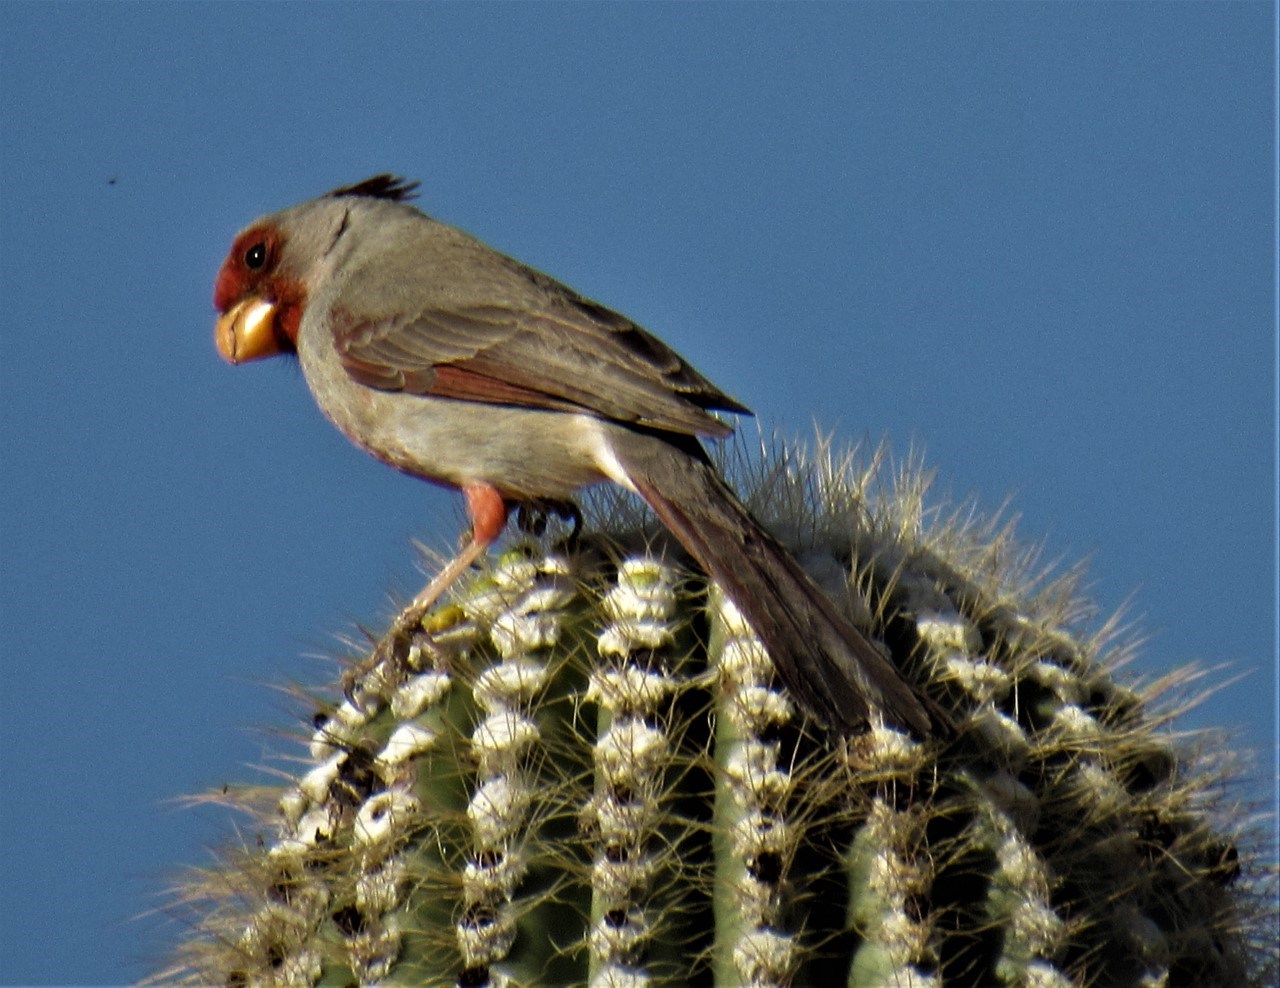 A silver bird with red patches on its face and belly sits atop a saguaro.